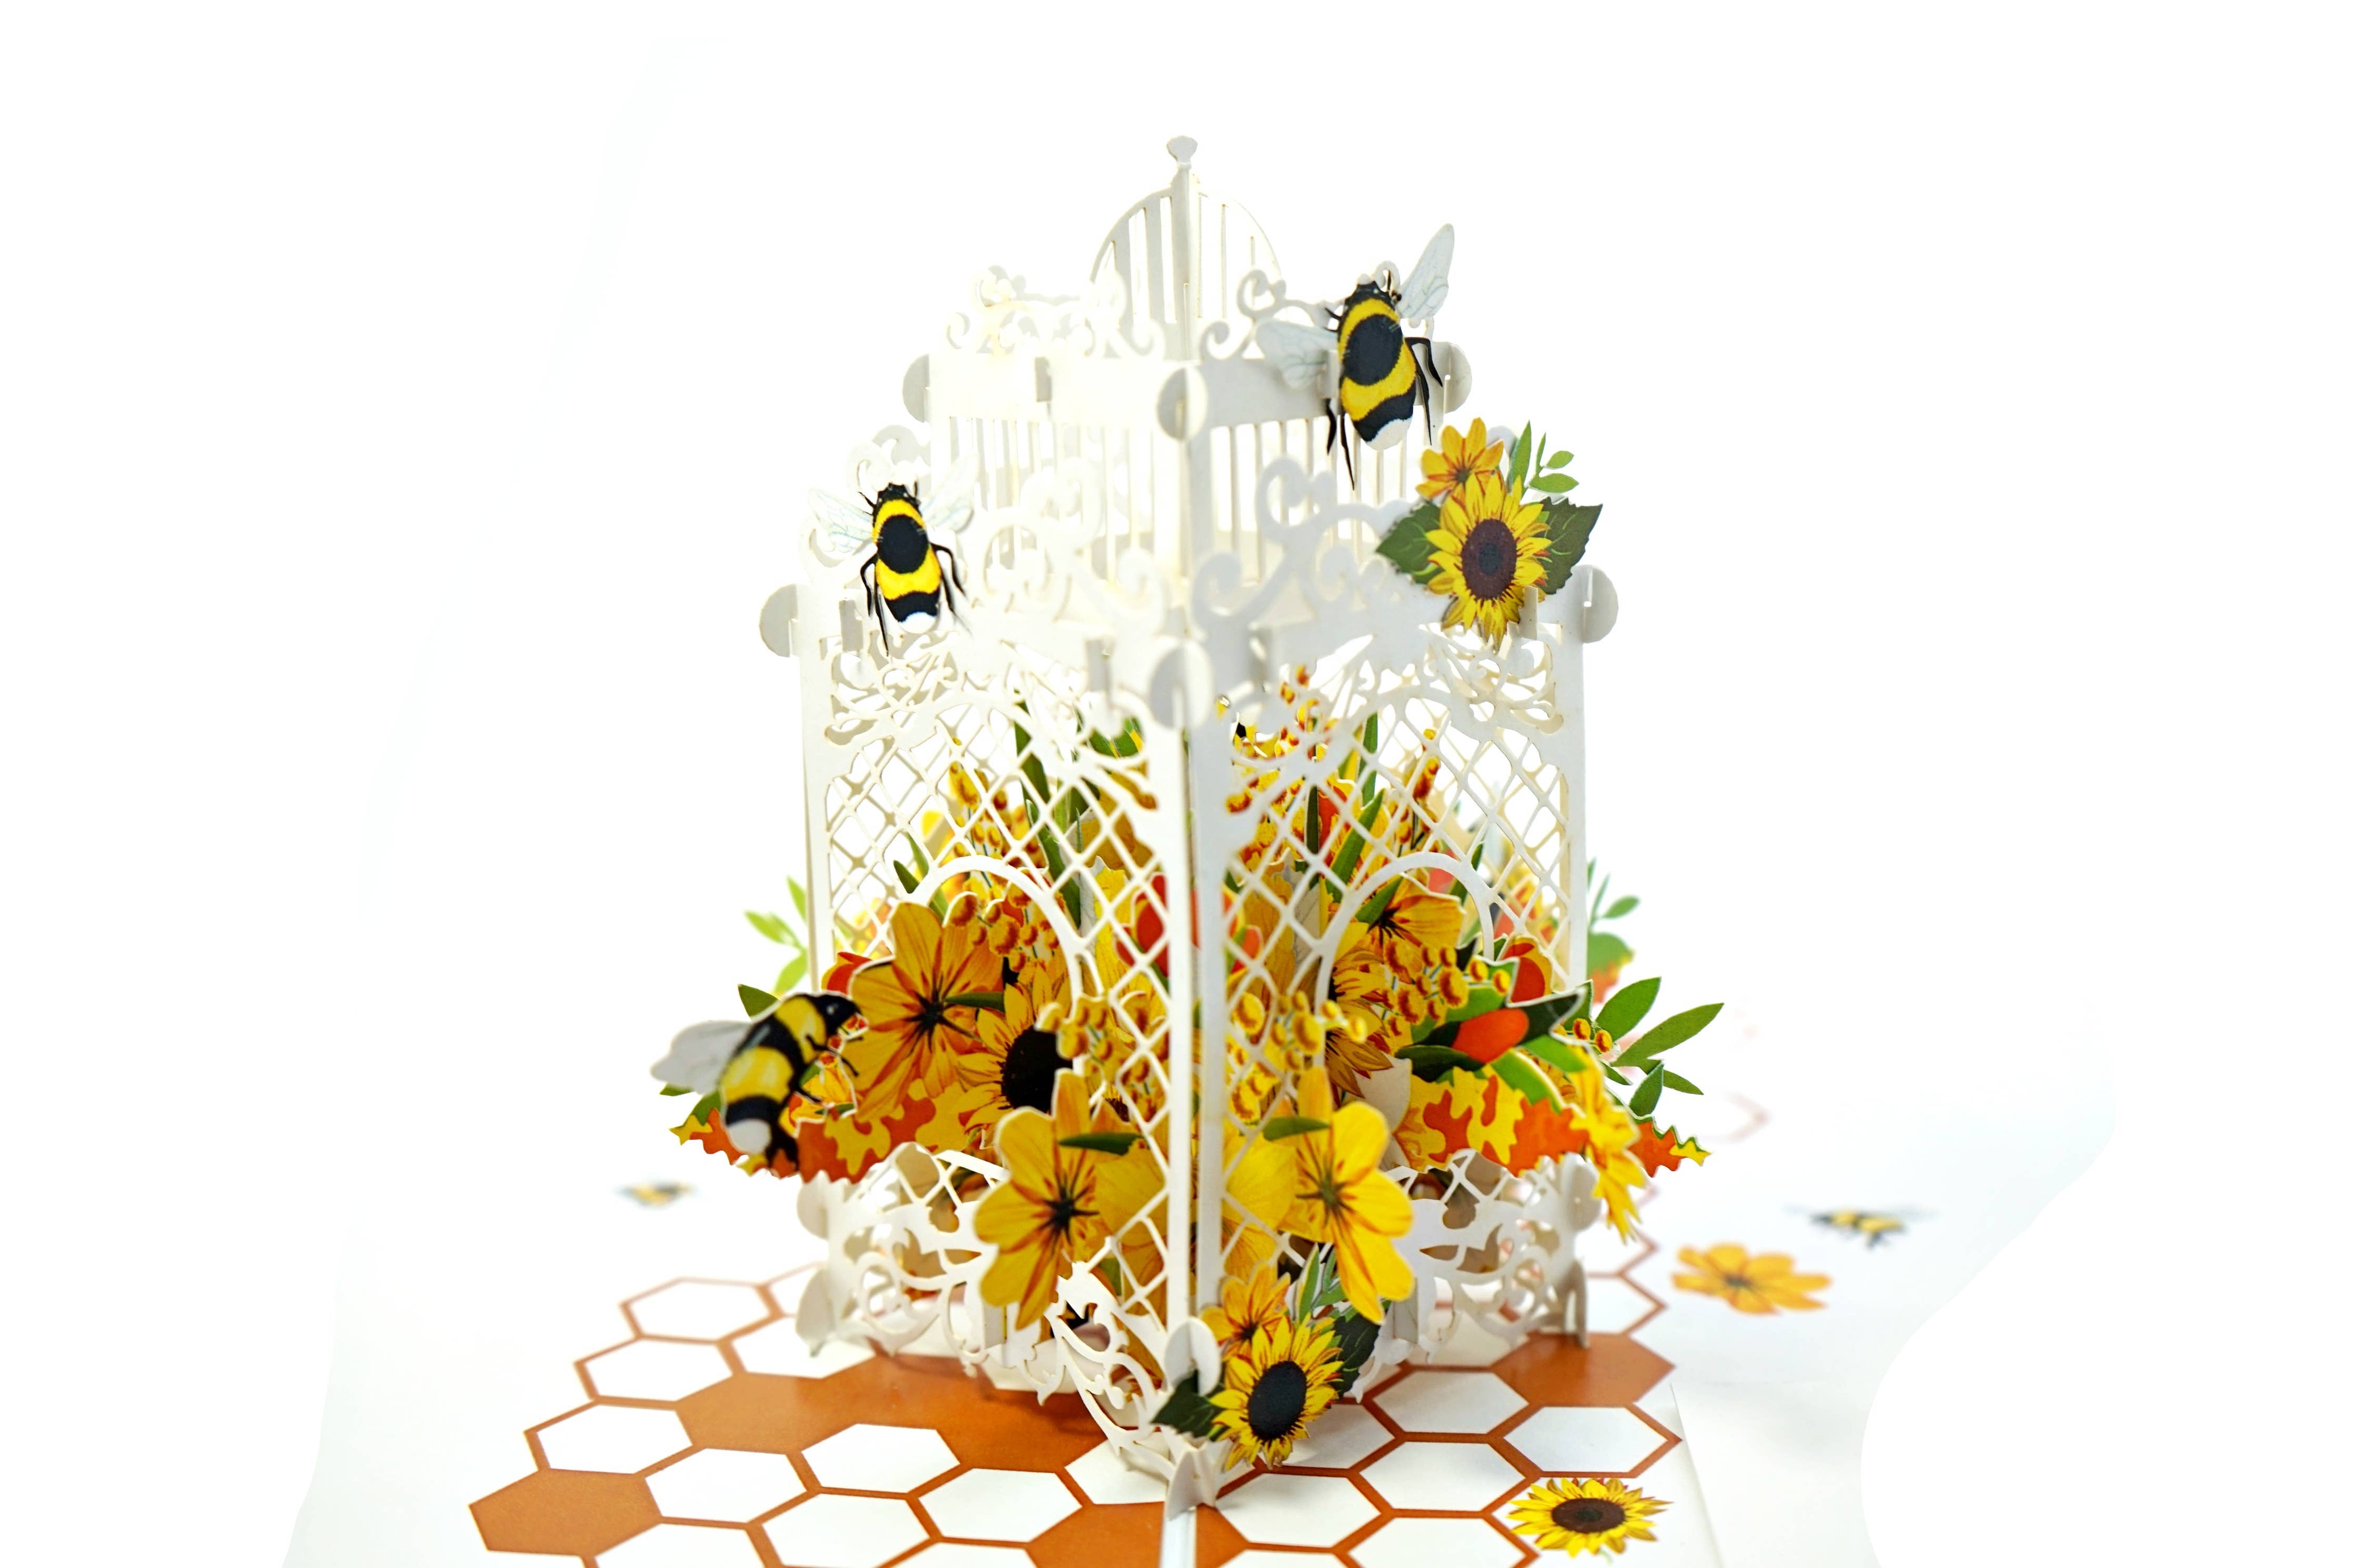 Bees & Sunflowers 3D Pop-Up Greeting Card